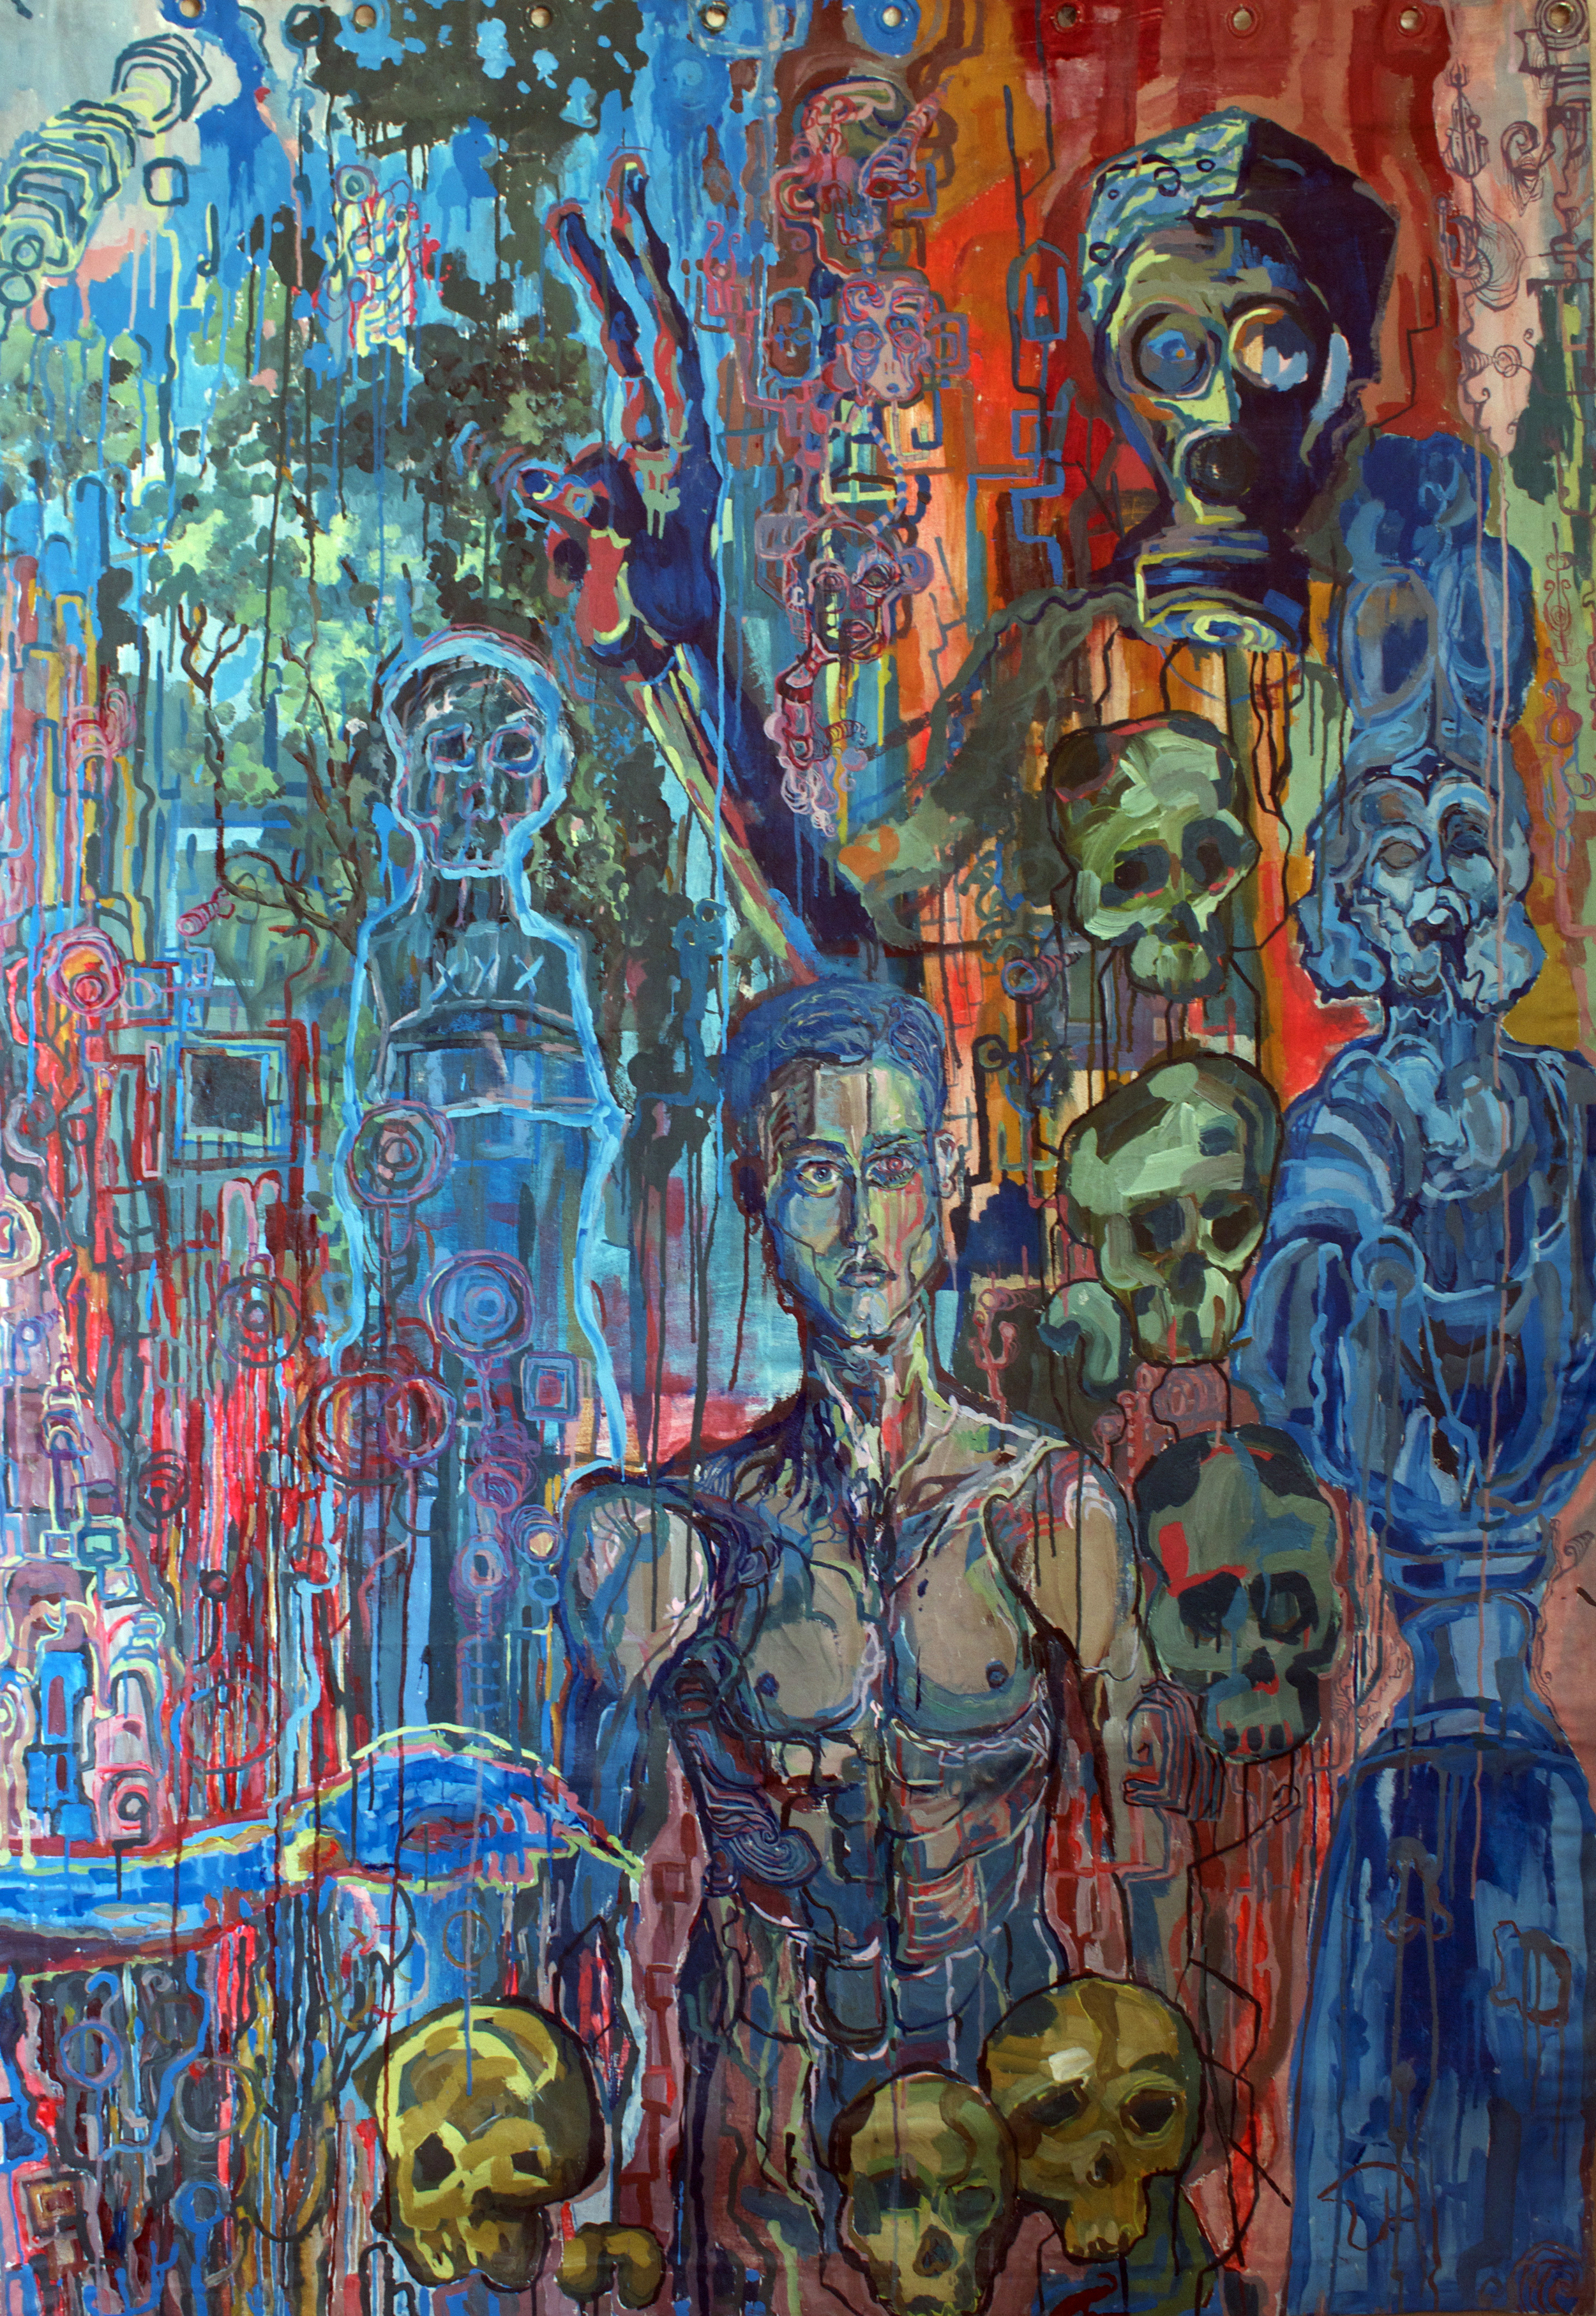           History's Decay, Acrylic on Canvas, 6ft x 5ft, 2002 